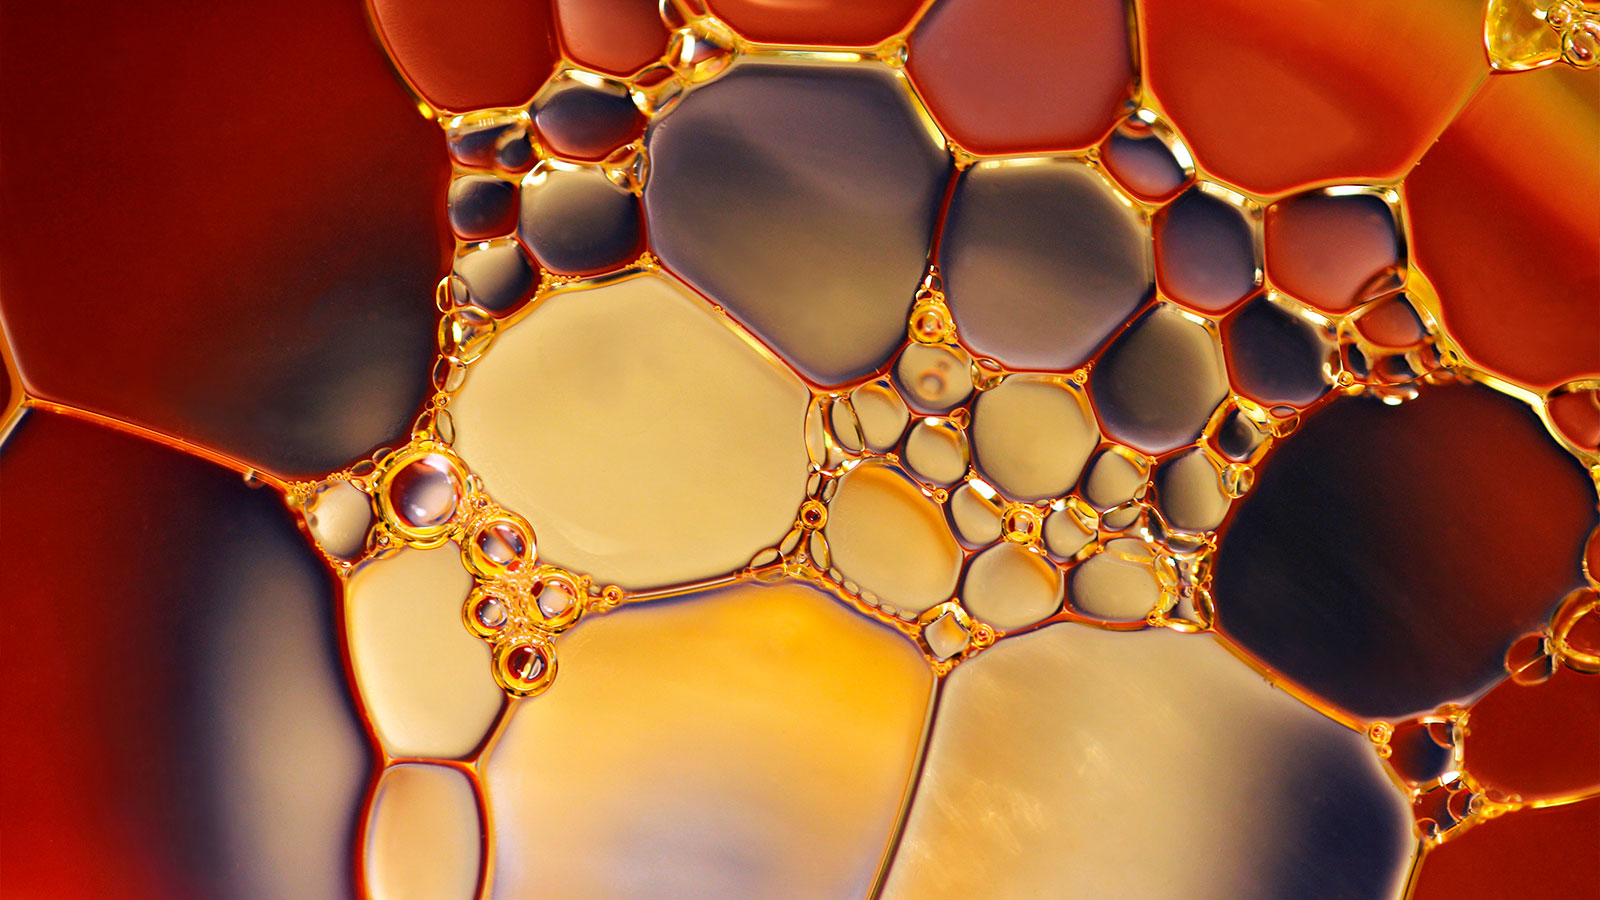 A close up view of a liquid with bubbles intertwining.